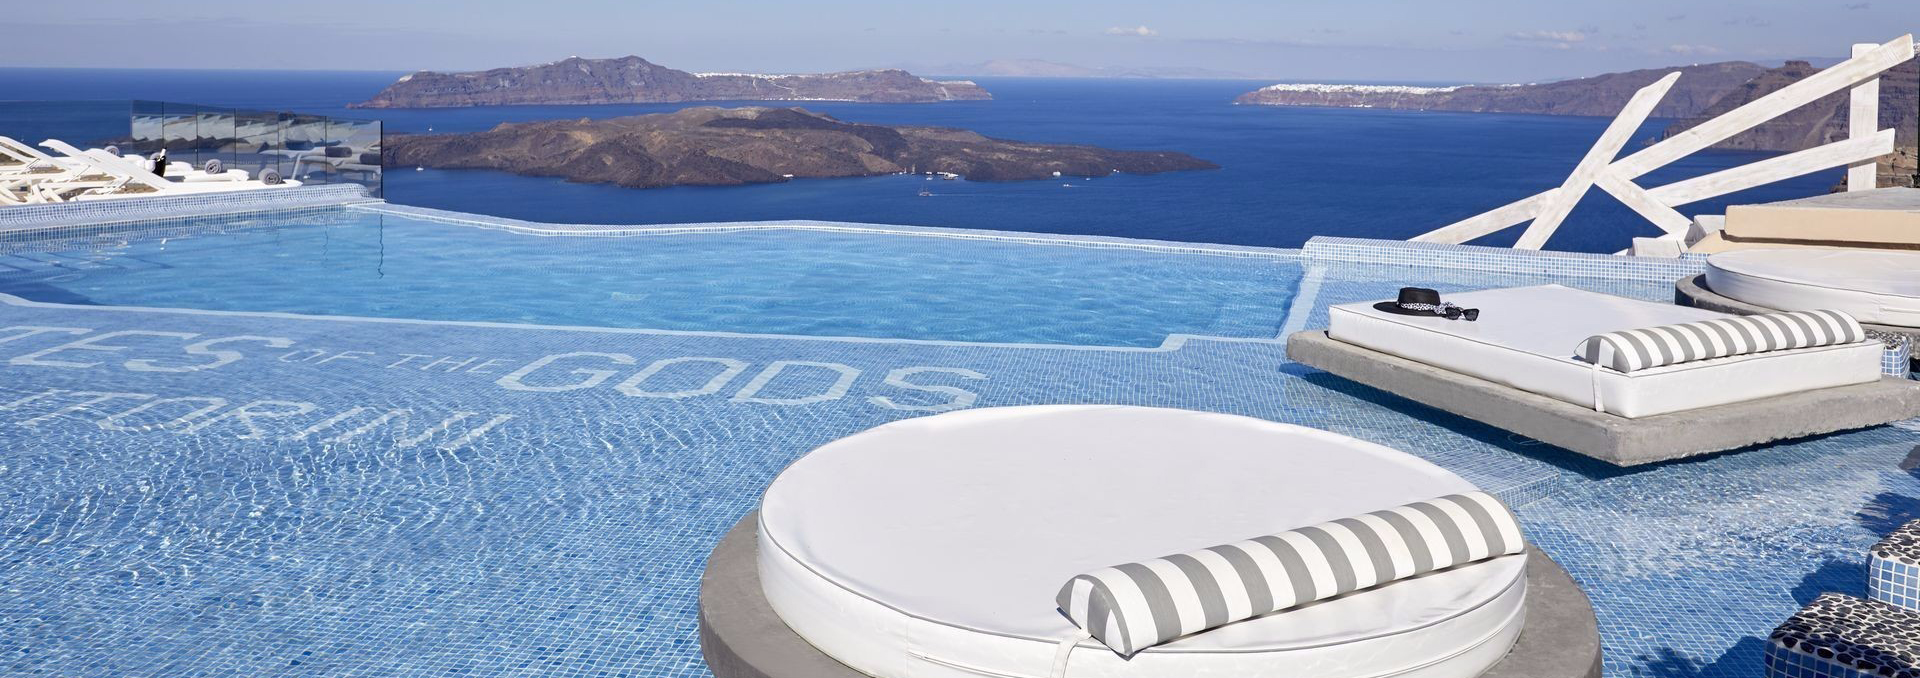 Book your wedding day in Suites of the Gods Spa Hotel Santorini